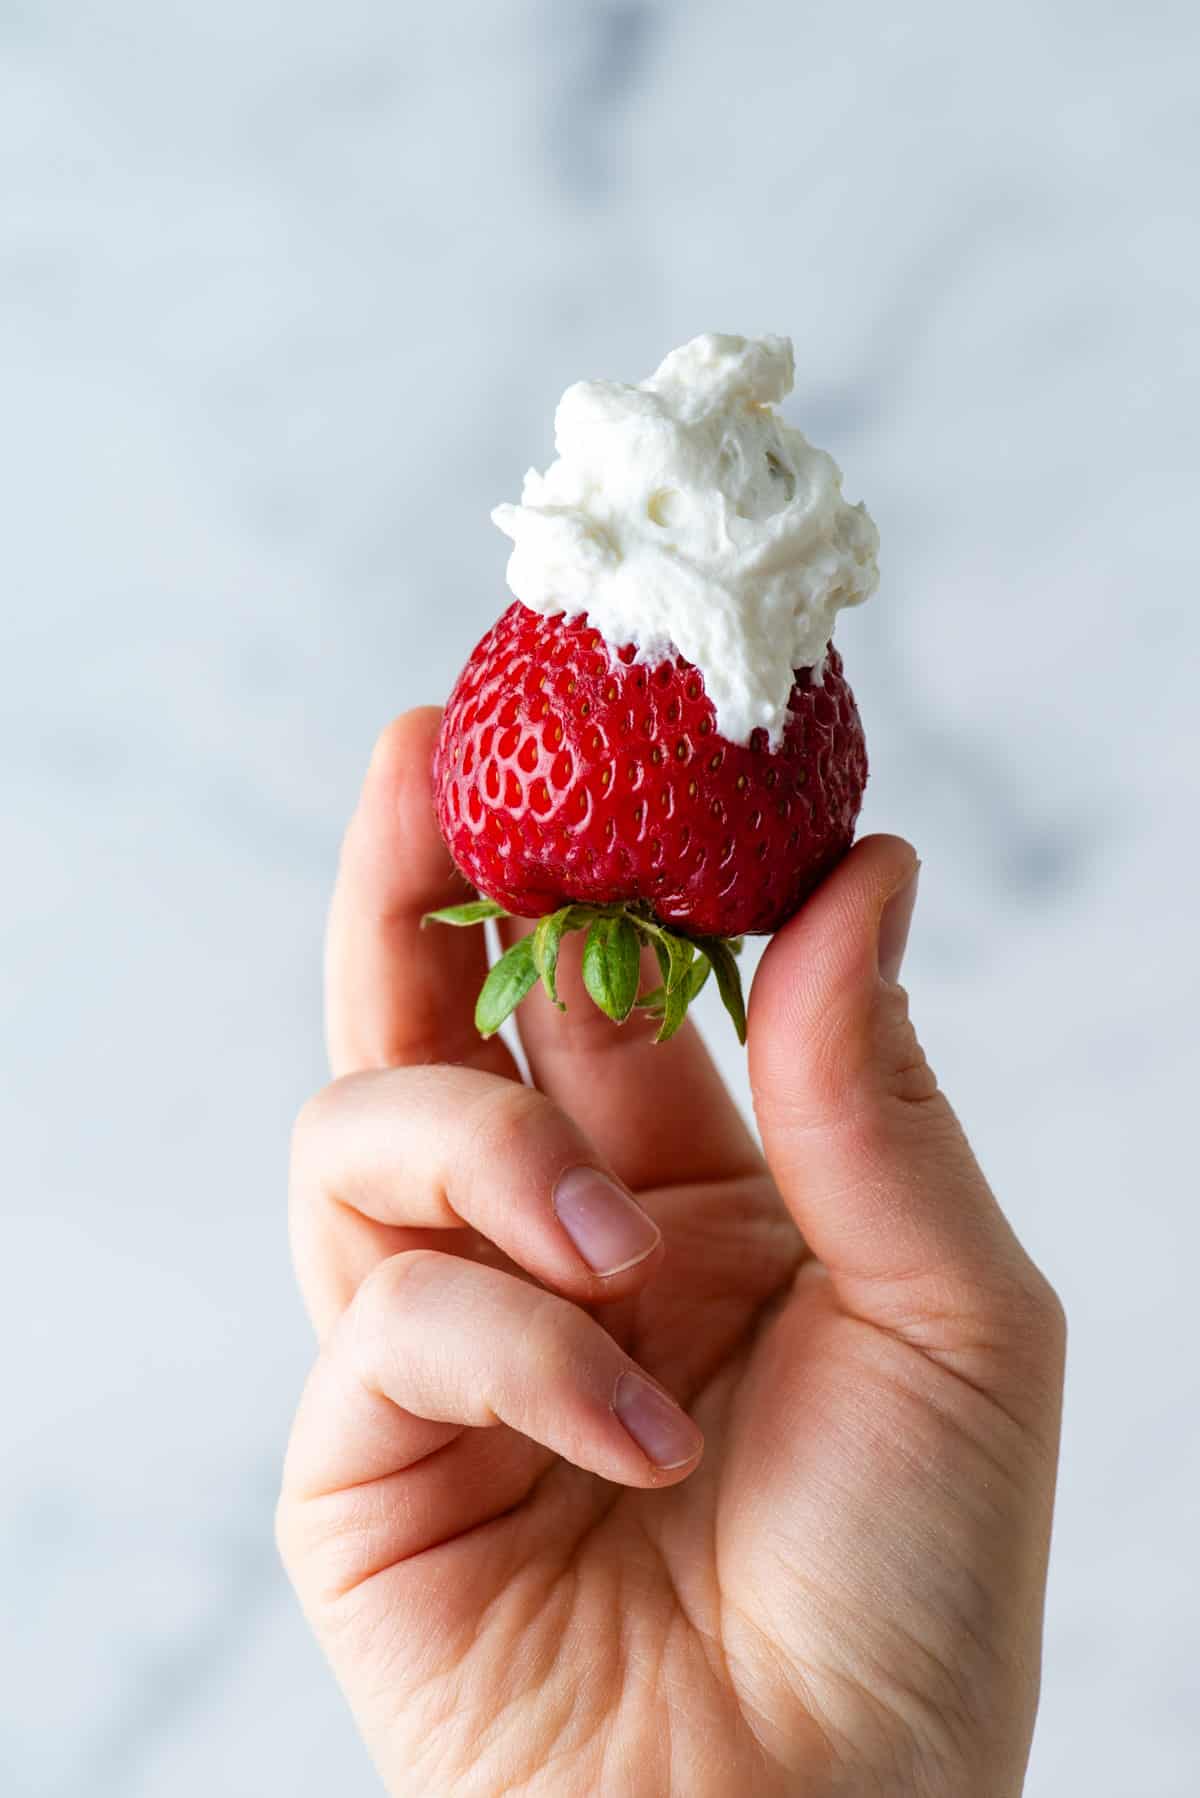 a hand holding a strawberry with stabilized whipped cream on top of it